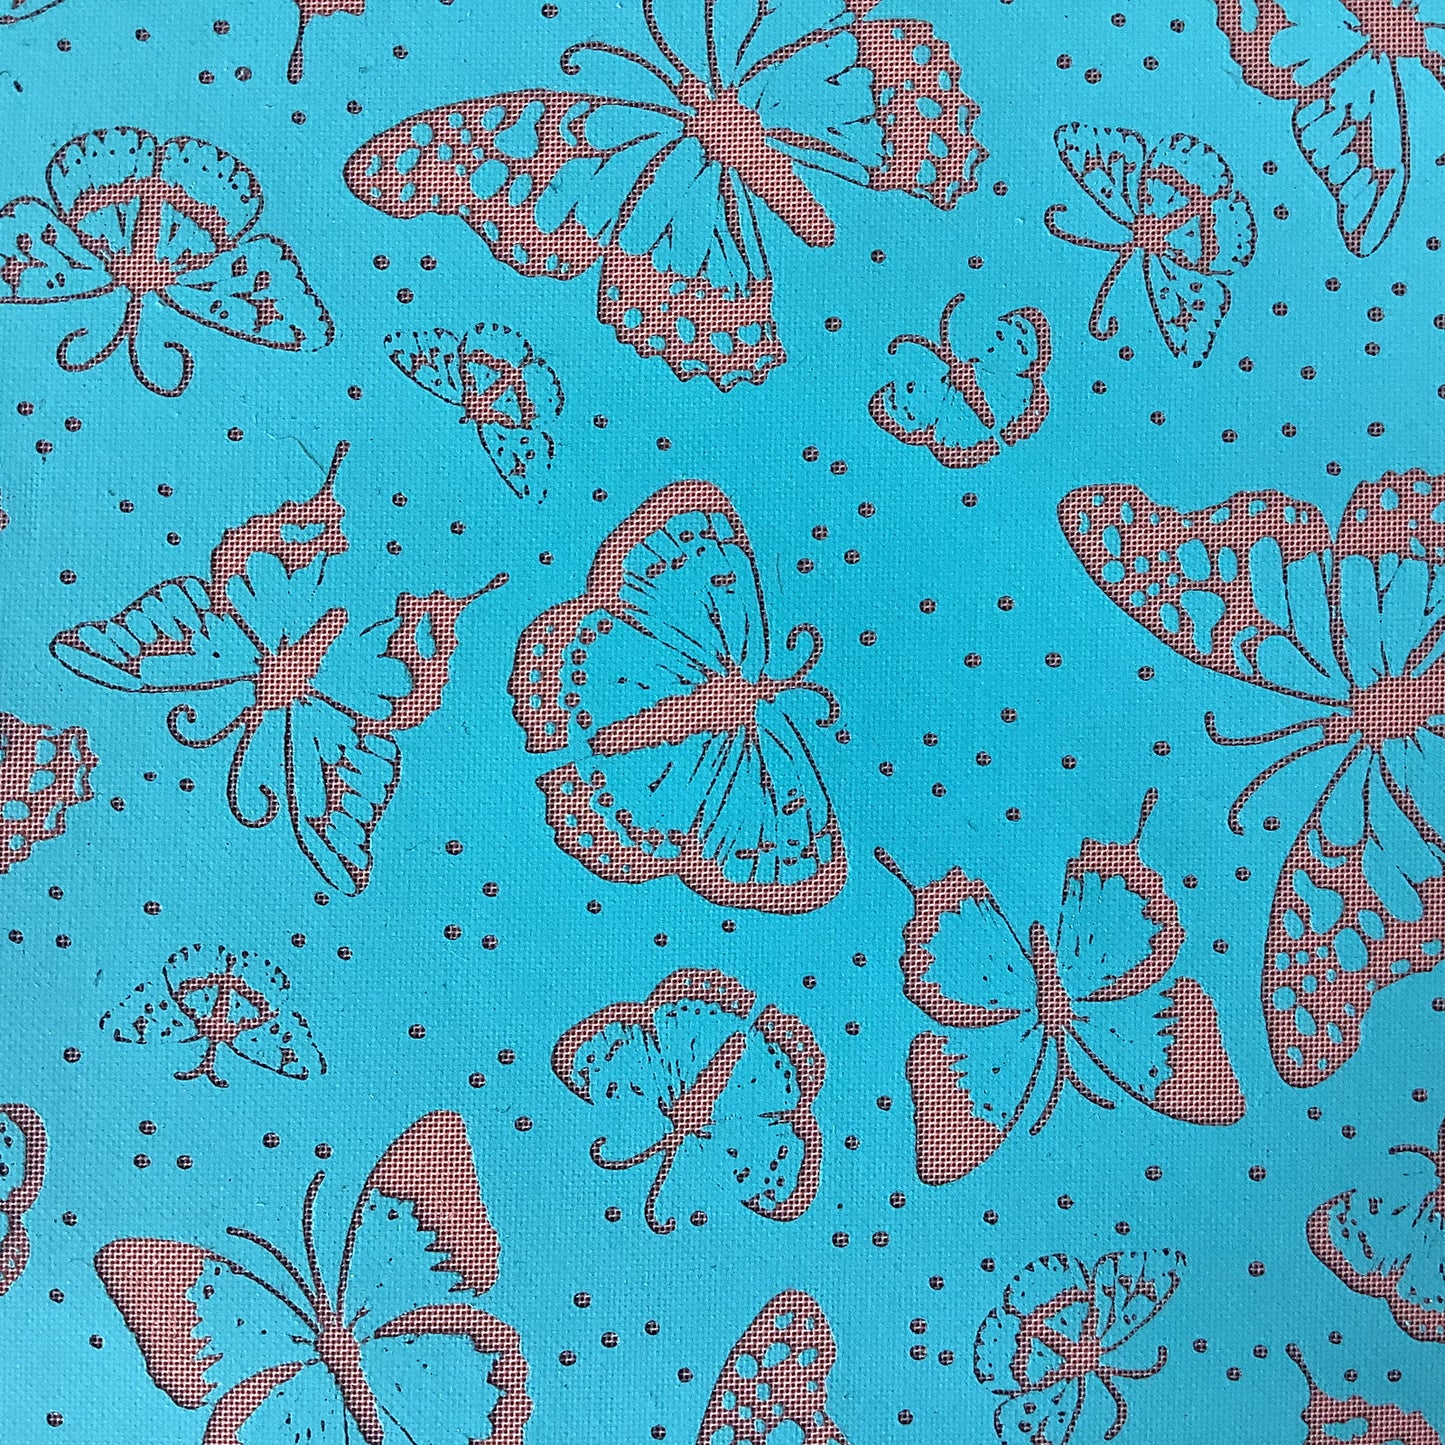 Attracting Butterflies Silkscreen For Crafting For Polymer Clay + Mixed Media